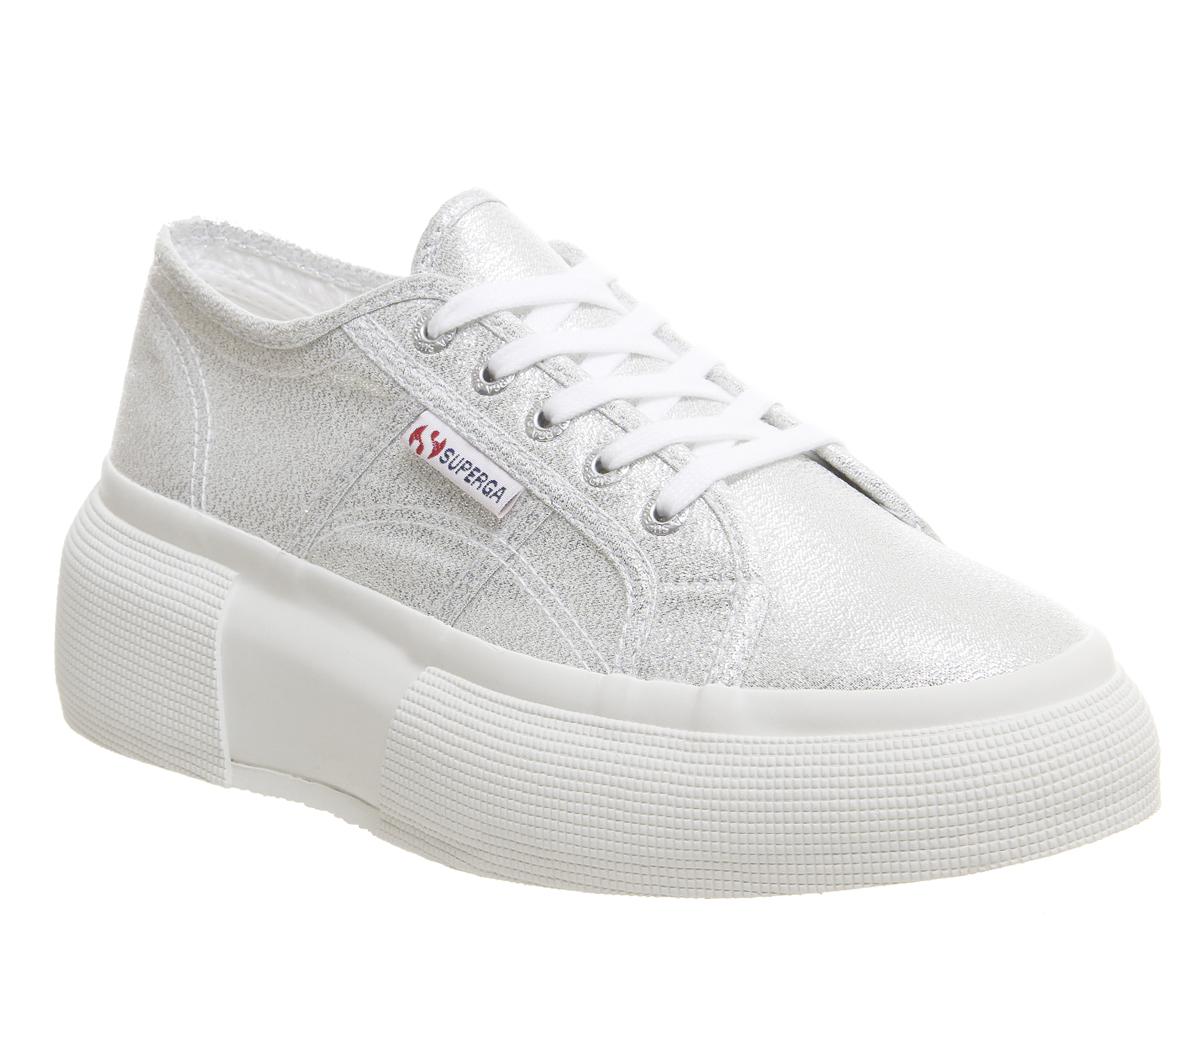 Superga 2287 Trainers Grey Silver - Hers trainers